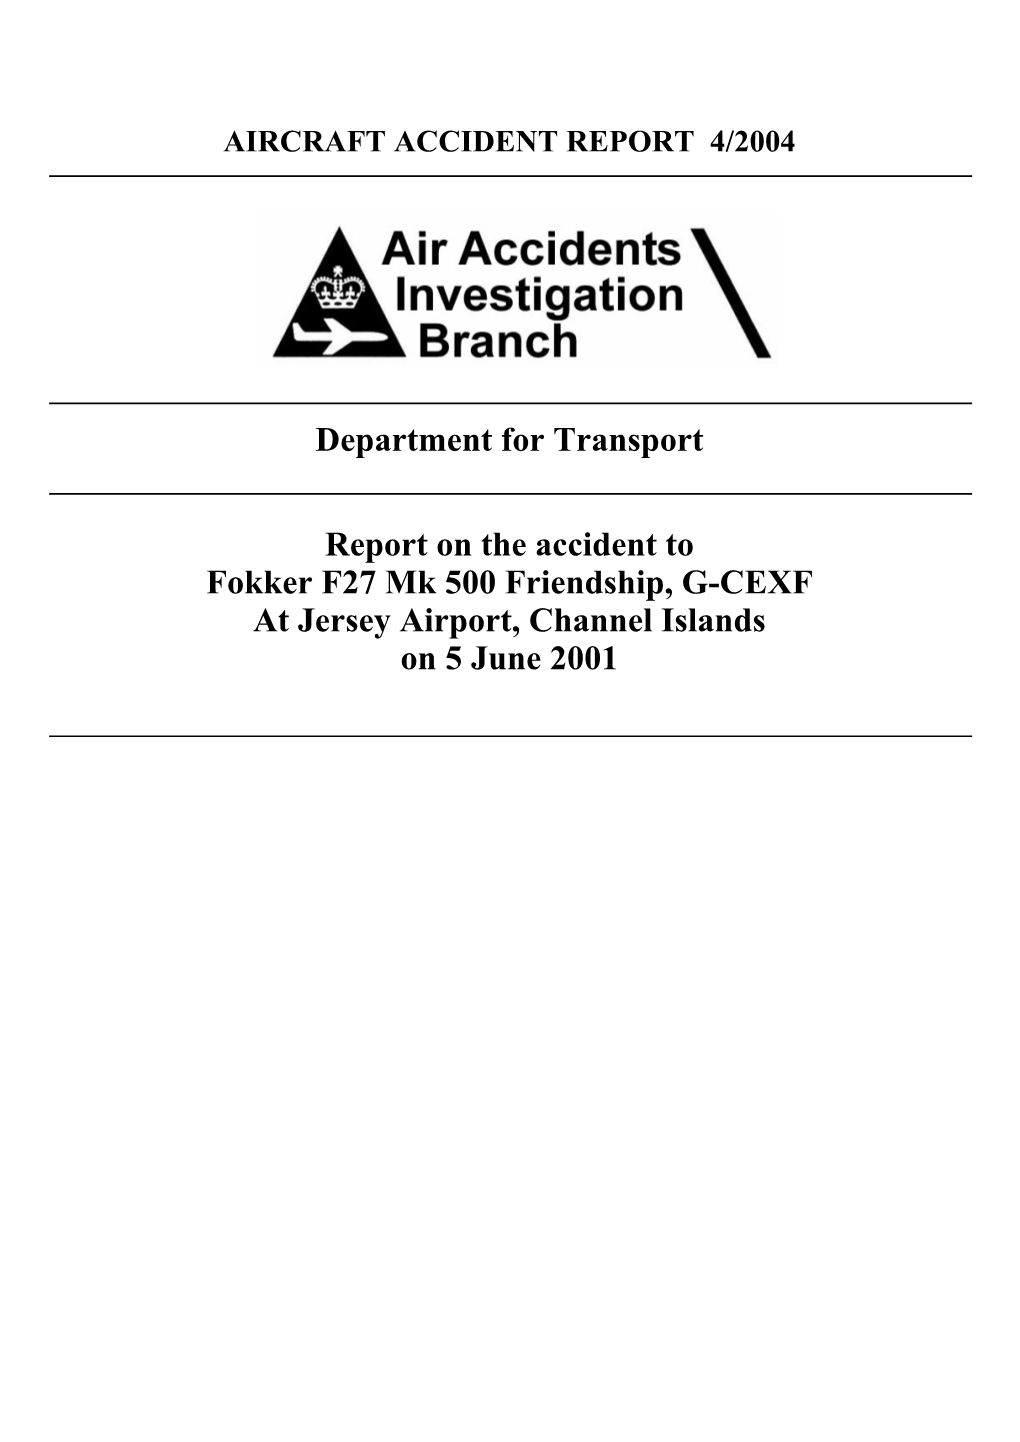 Department for Transport Report on the Accident to Fokker F27 Mk 500 Friendship, G-CEXF at Jersey Airport, Channel Islands on 5